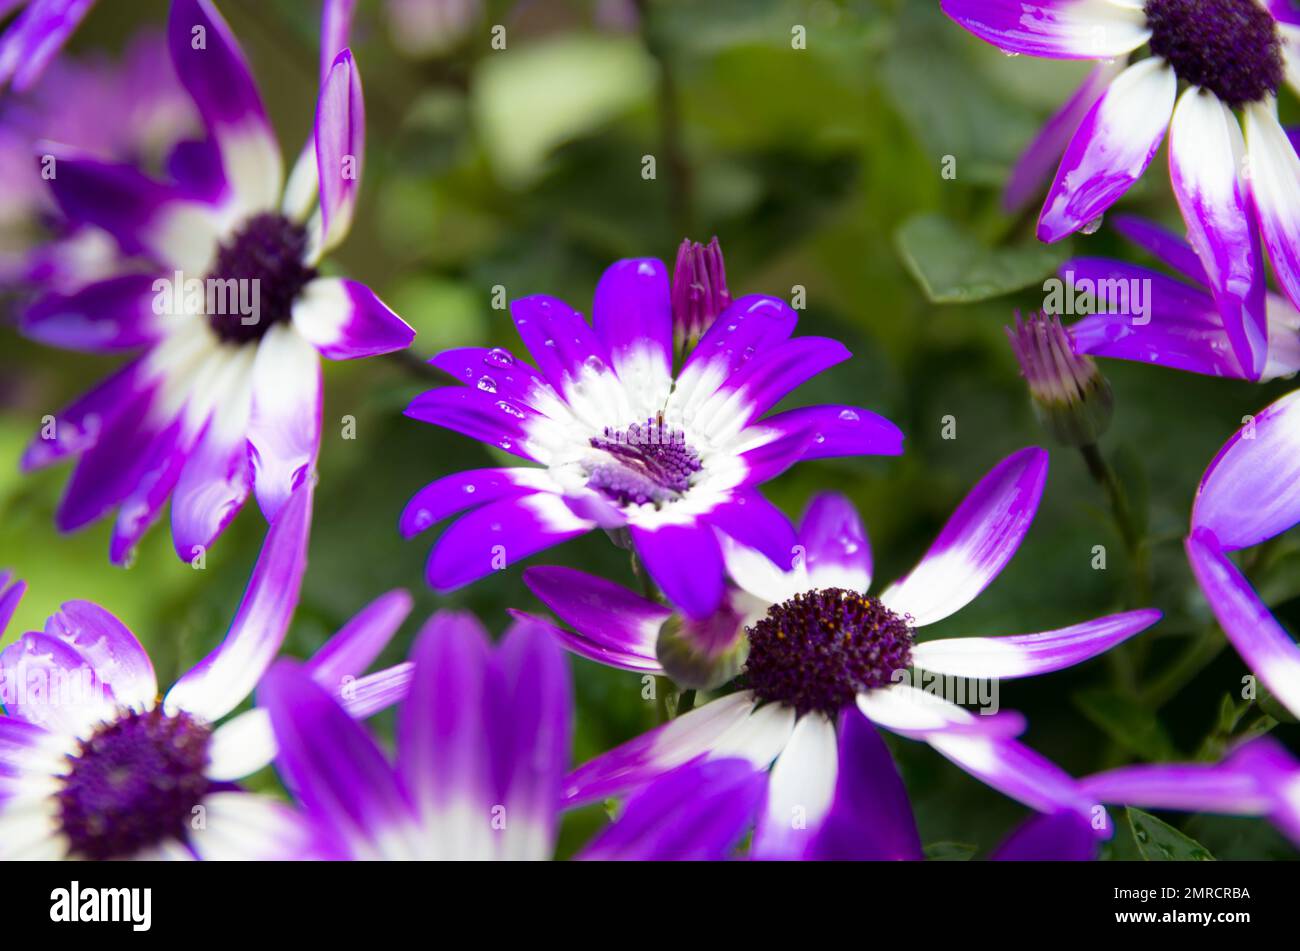 A closeup shot of bright purple cineraria flowers covered in dew drops in the garden in the daylight Stock Photo